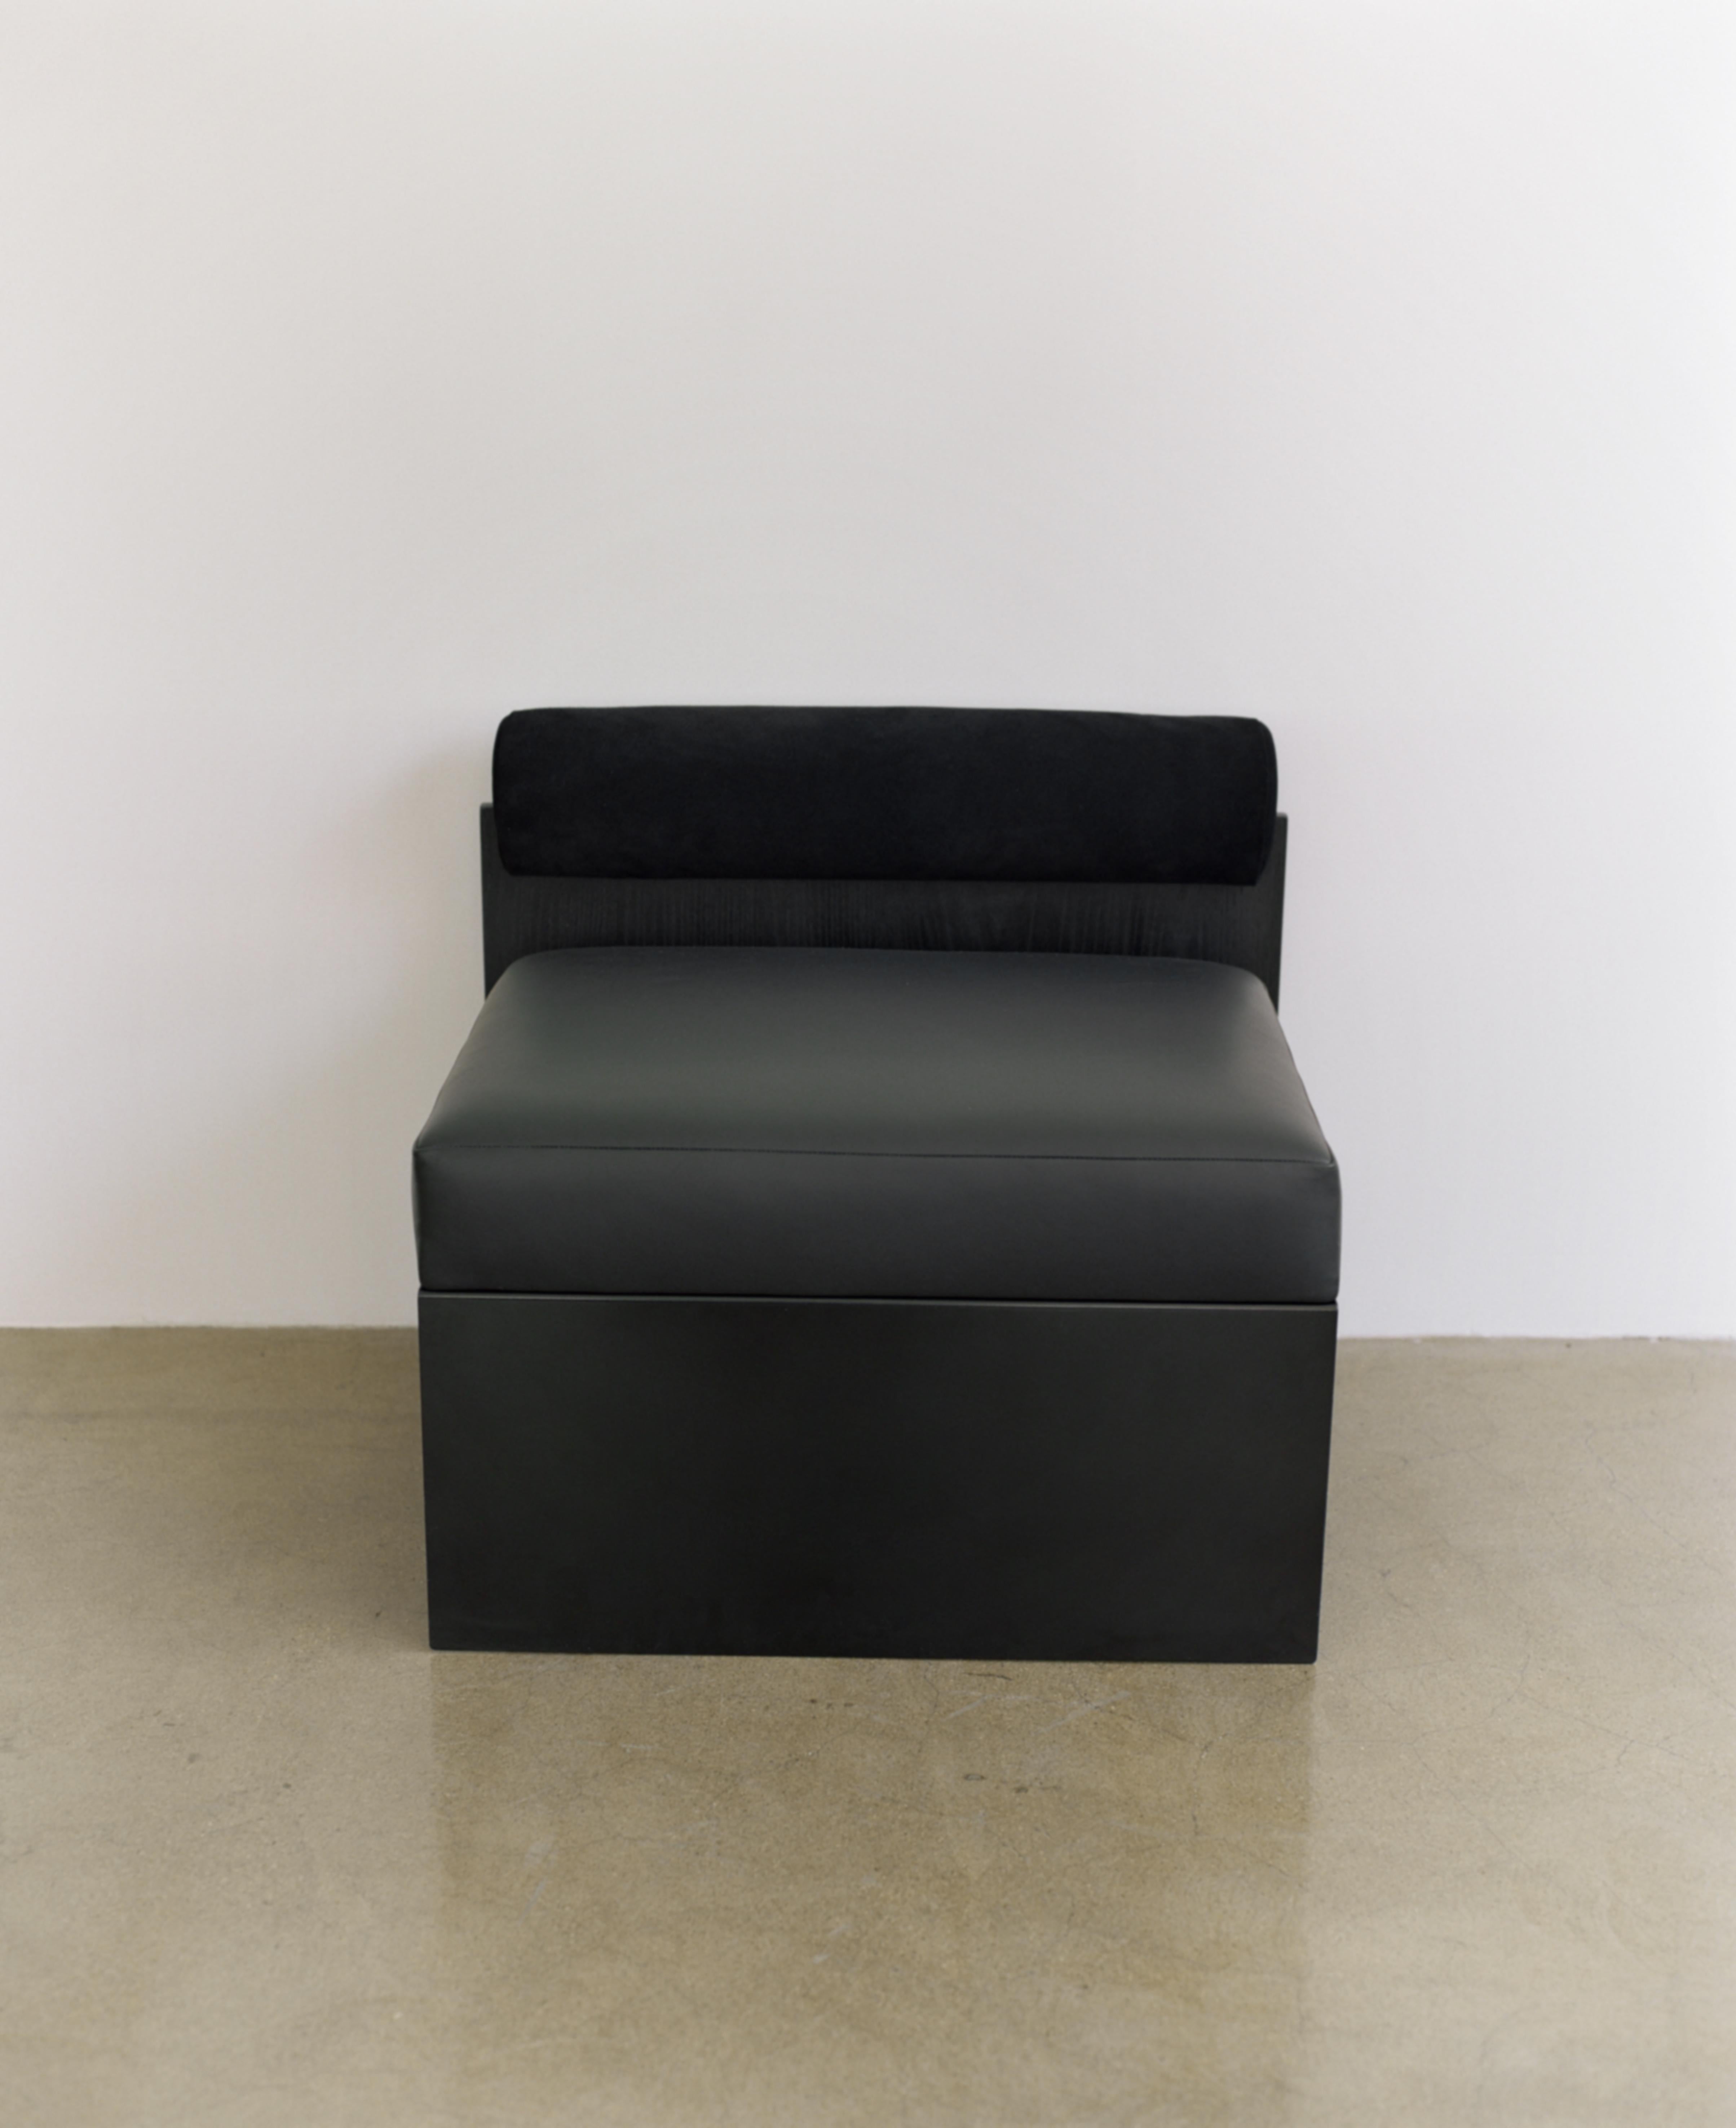 Building blocks lounge chair by Jialun Xiong
Dimensions: 28”W x 25”D x 25”H inch
Materials: Metal and leather

COM/COL Option Available.

“ I have an aptitude for exploring the nuances of infinite combination of materials. I’m always carefully